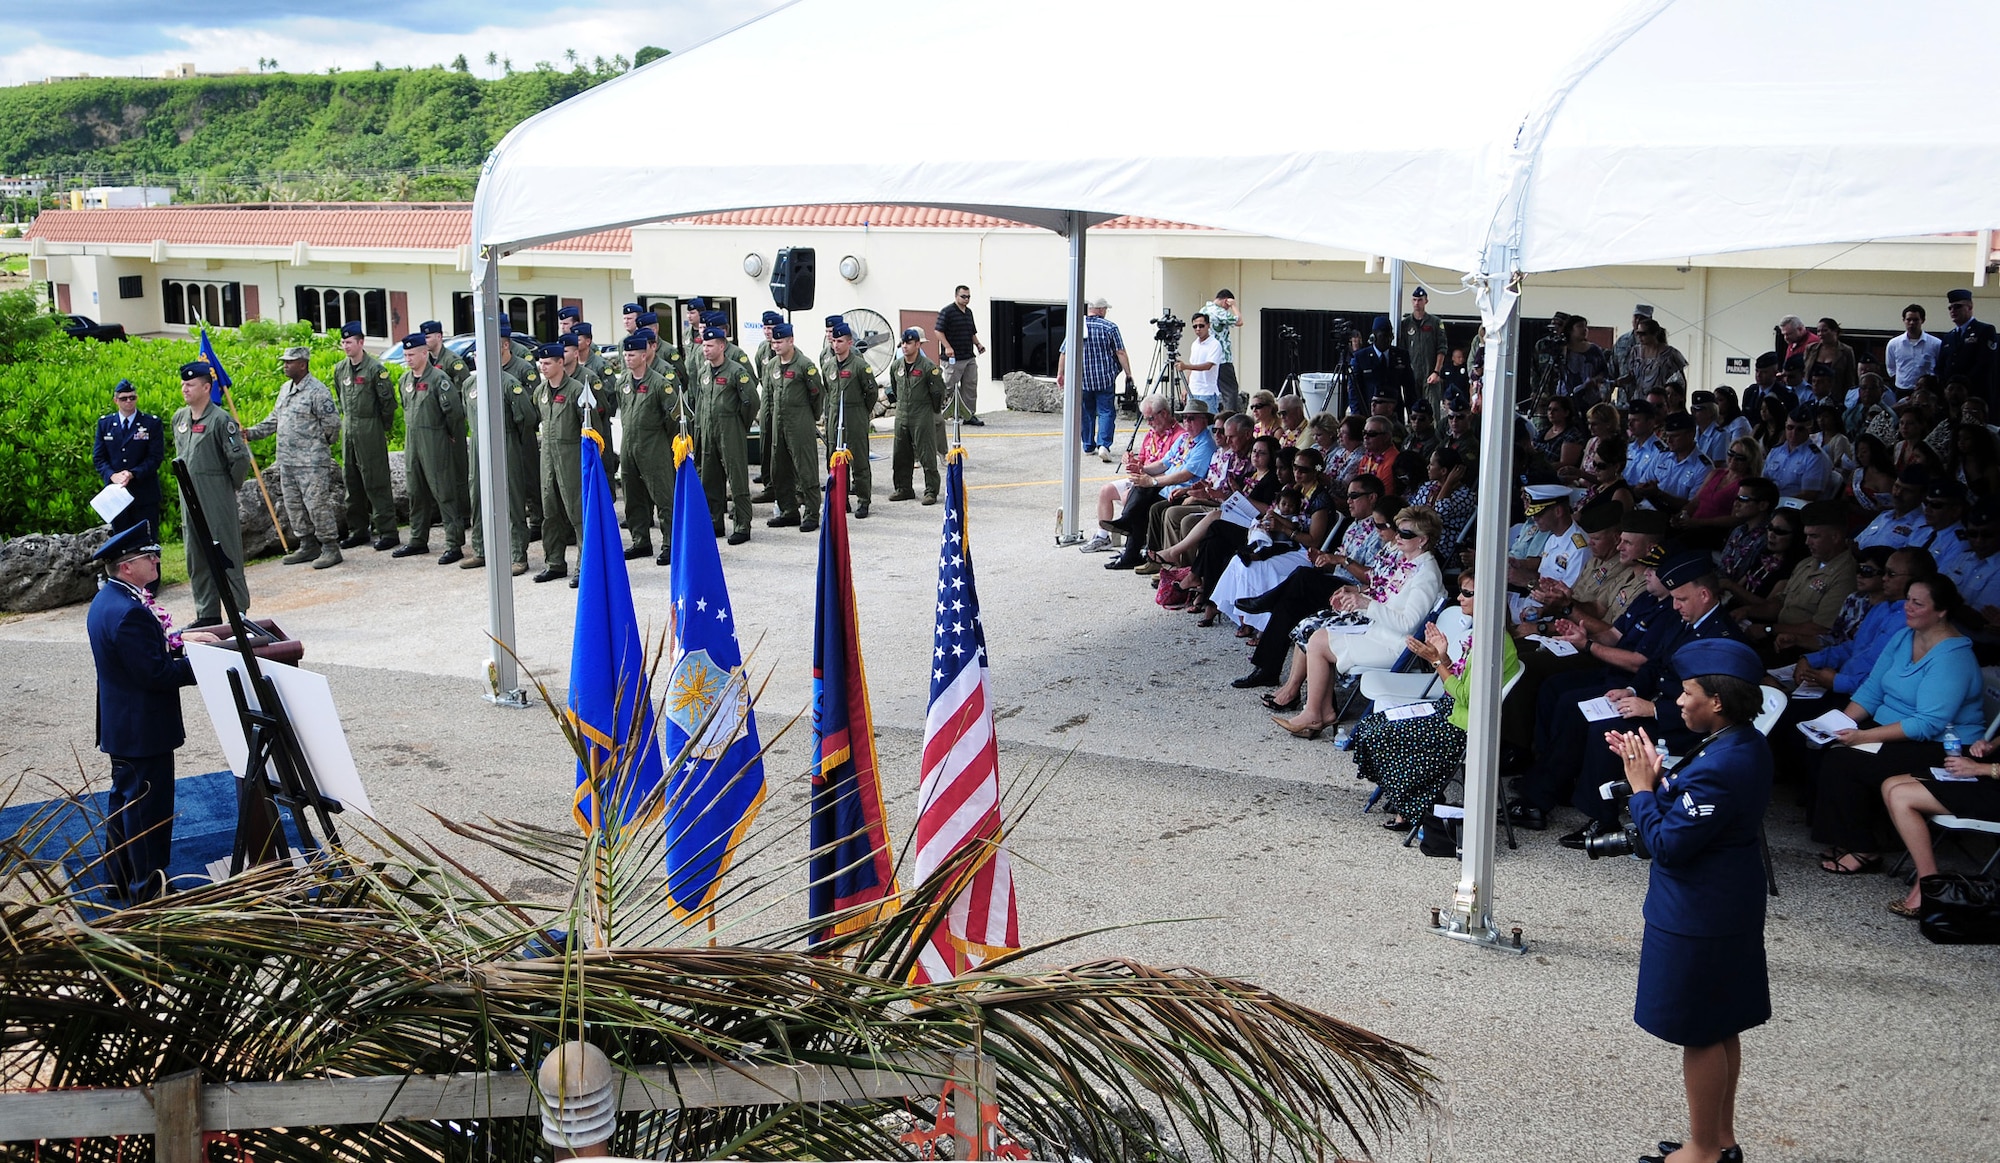 Brig. Gen. Phil Ruhlman, commander of the 36th Wing at Andersen Air Force Base, Guam, speaks about the dedication of the fallen RAIDR 21 aircrew July 20 during a memorial unveiling ceremony at the Governor's Complex at Adelup Point in Hagatna, Guam. Family, friends and co-workers of the B-52 Stratofortress aircrew -- call sign RAIDR 21 -- along with members of the local Guam community honored the memory of the Airmen with the ceremony and the unveiling of a memorial dedicated to them.  The aircrew died when their B-52 crashed off the coast of Guam July 21, 2008. (U.S. Air Force photo/Airman 1st Class Courtney Witt)